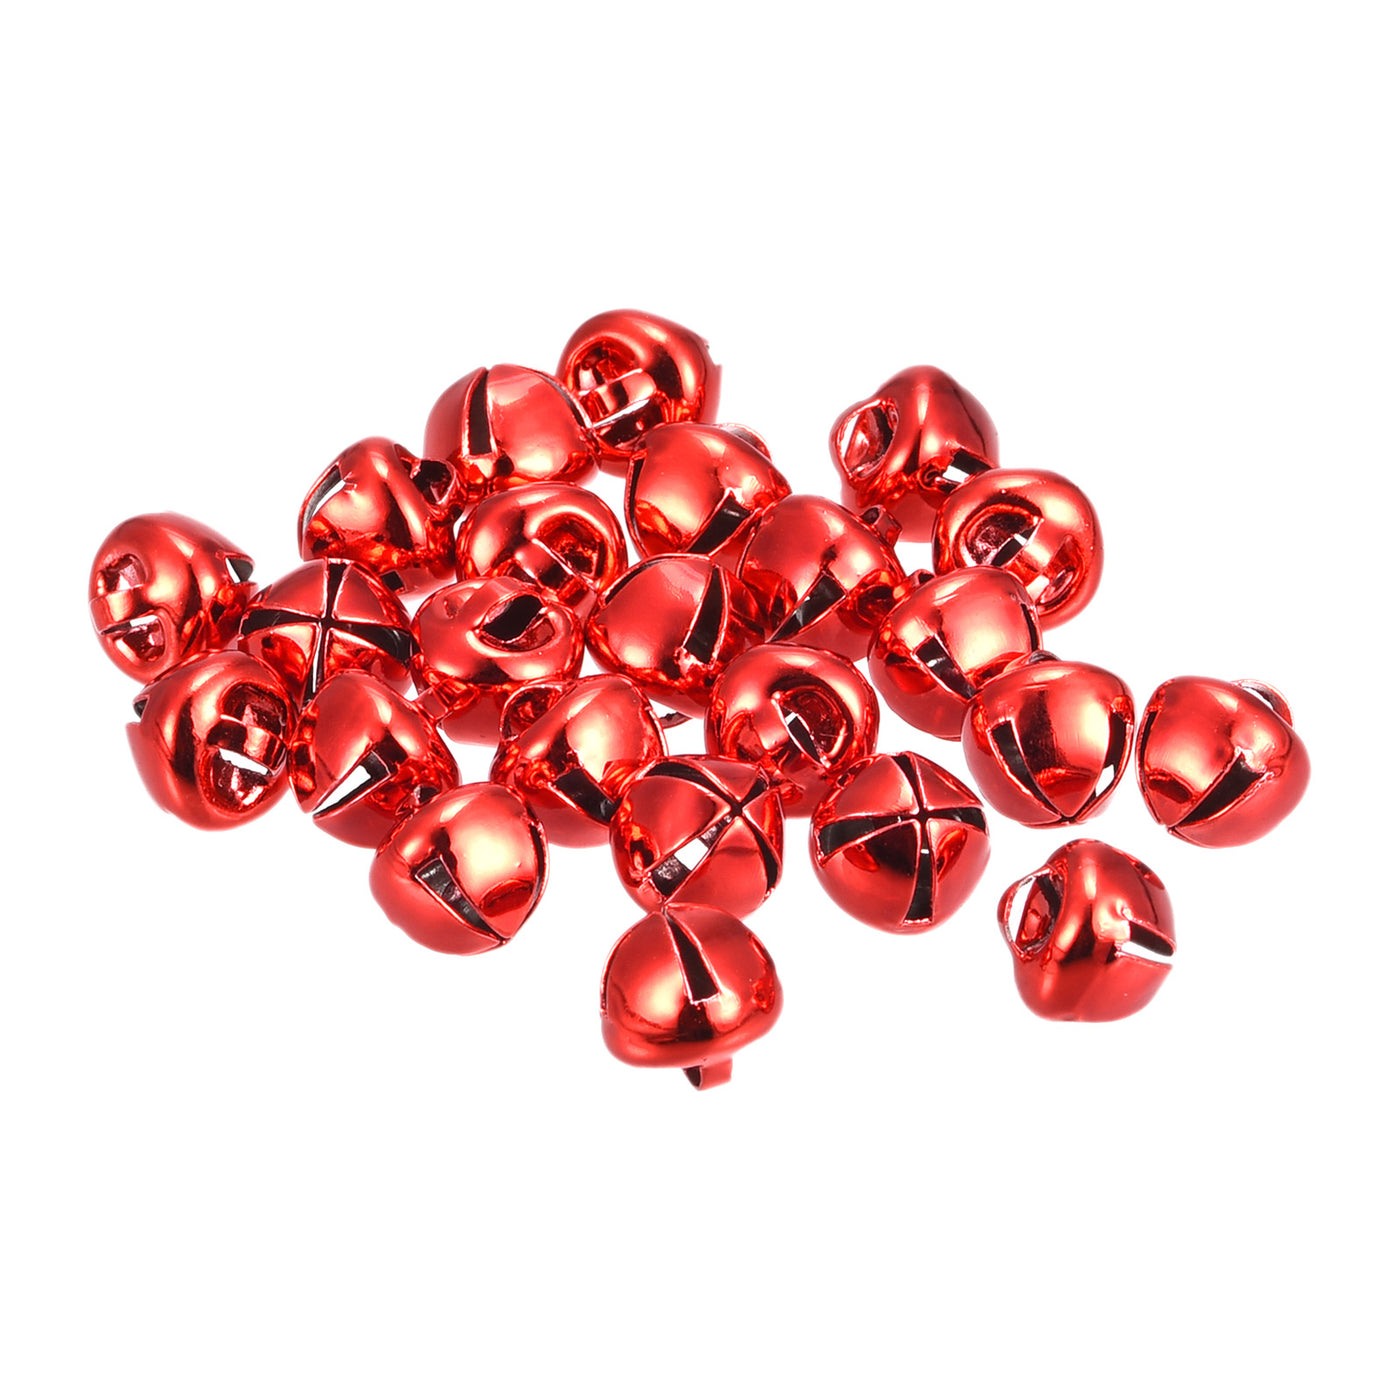 Uxcell Uxcell Jingle Bells, 8mm 24pcs Carbon Steel Craft Bells for DIY Christmas, Red